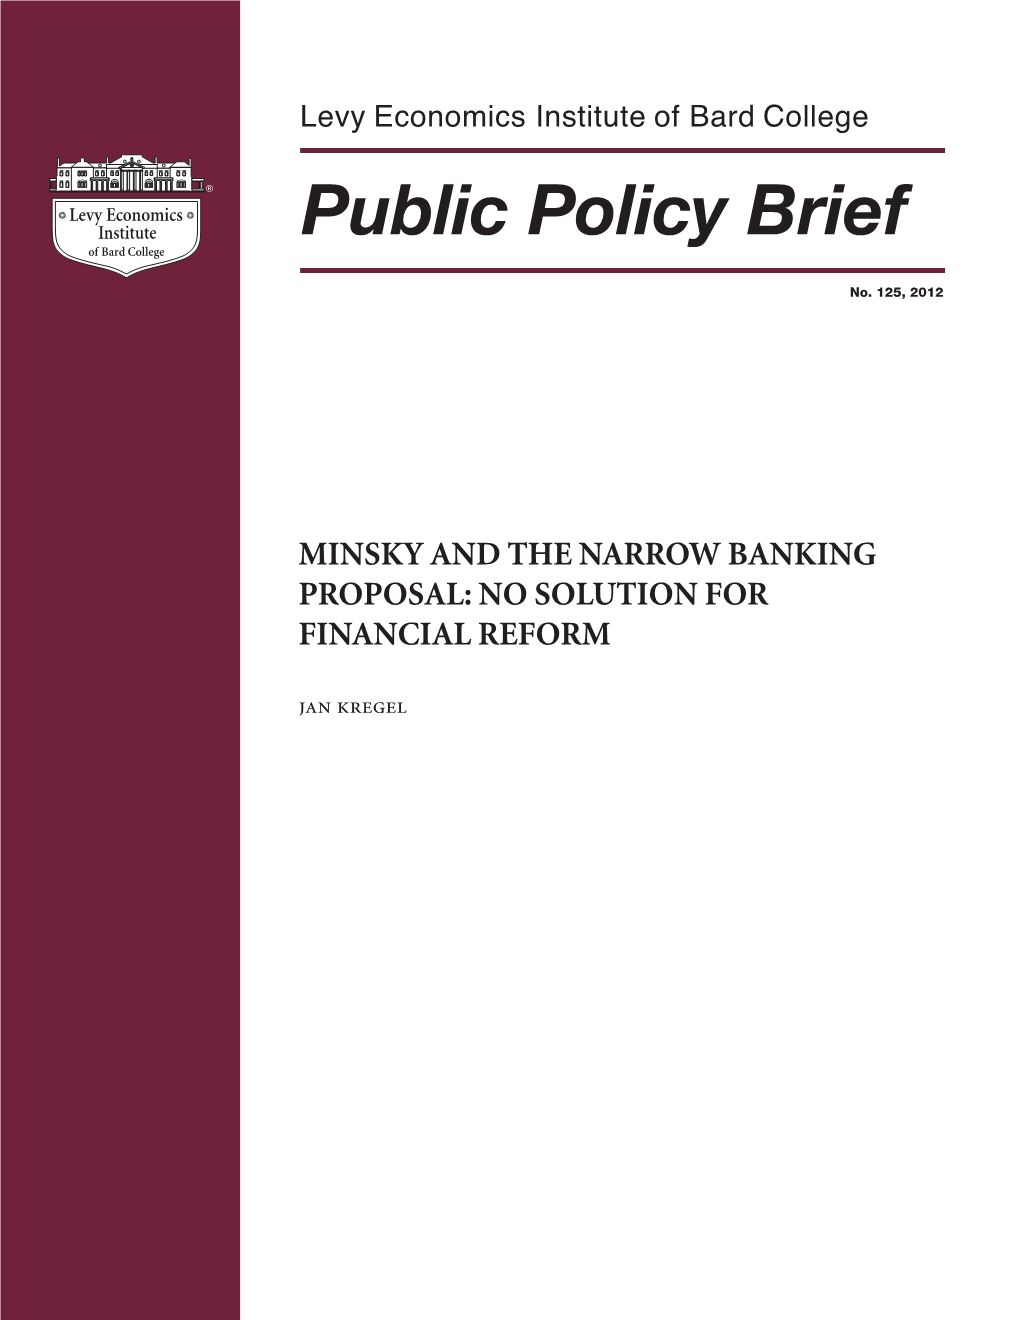 Minsky and the Narrow Banking Proposal: No Solution for Financial Reform